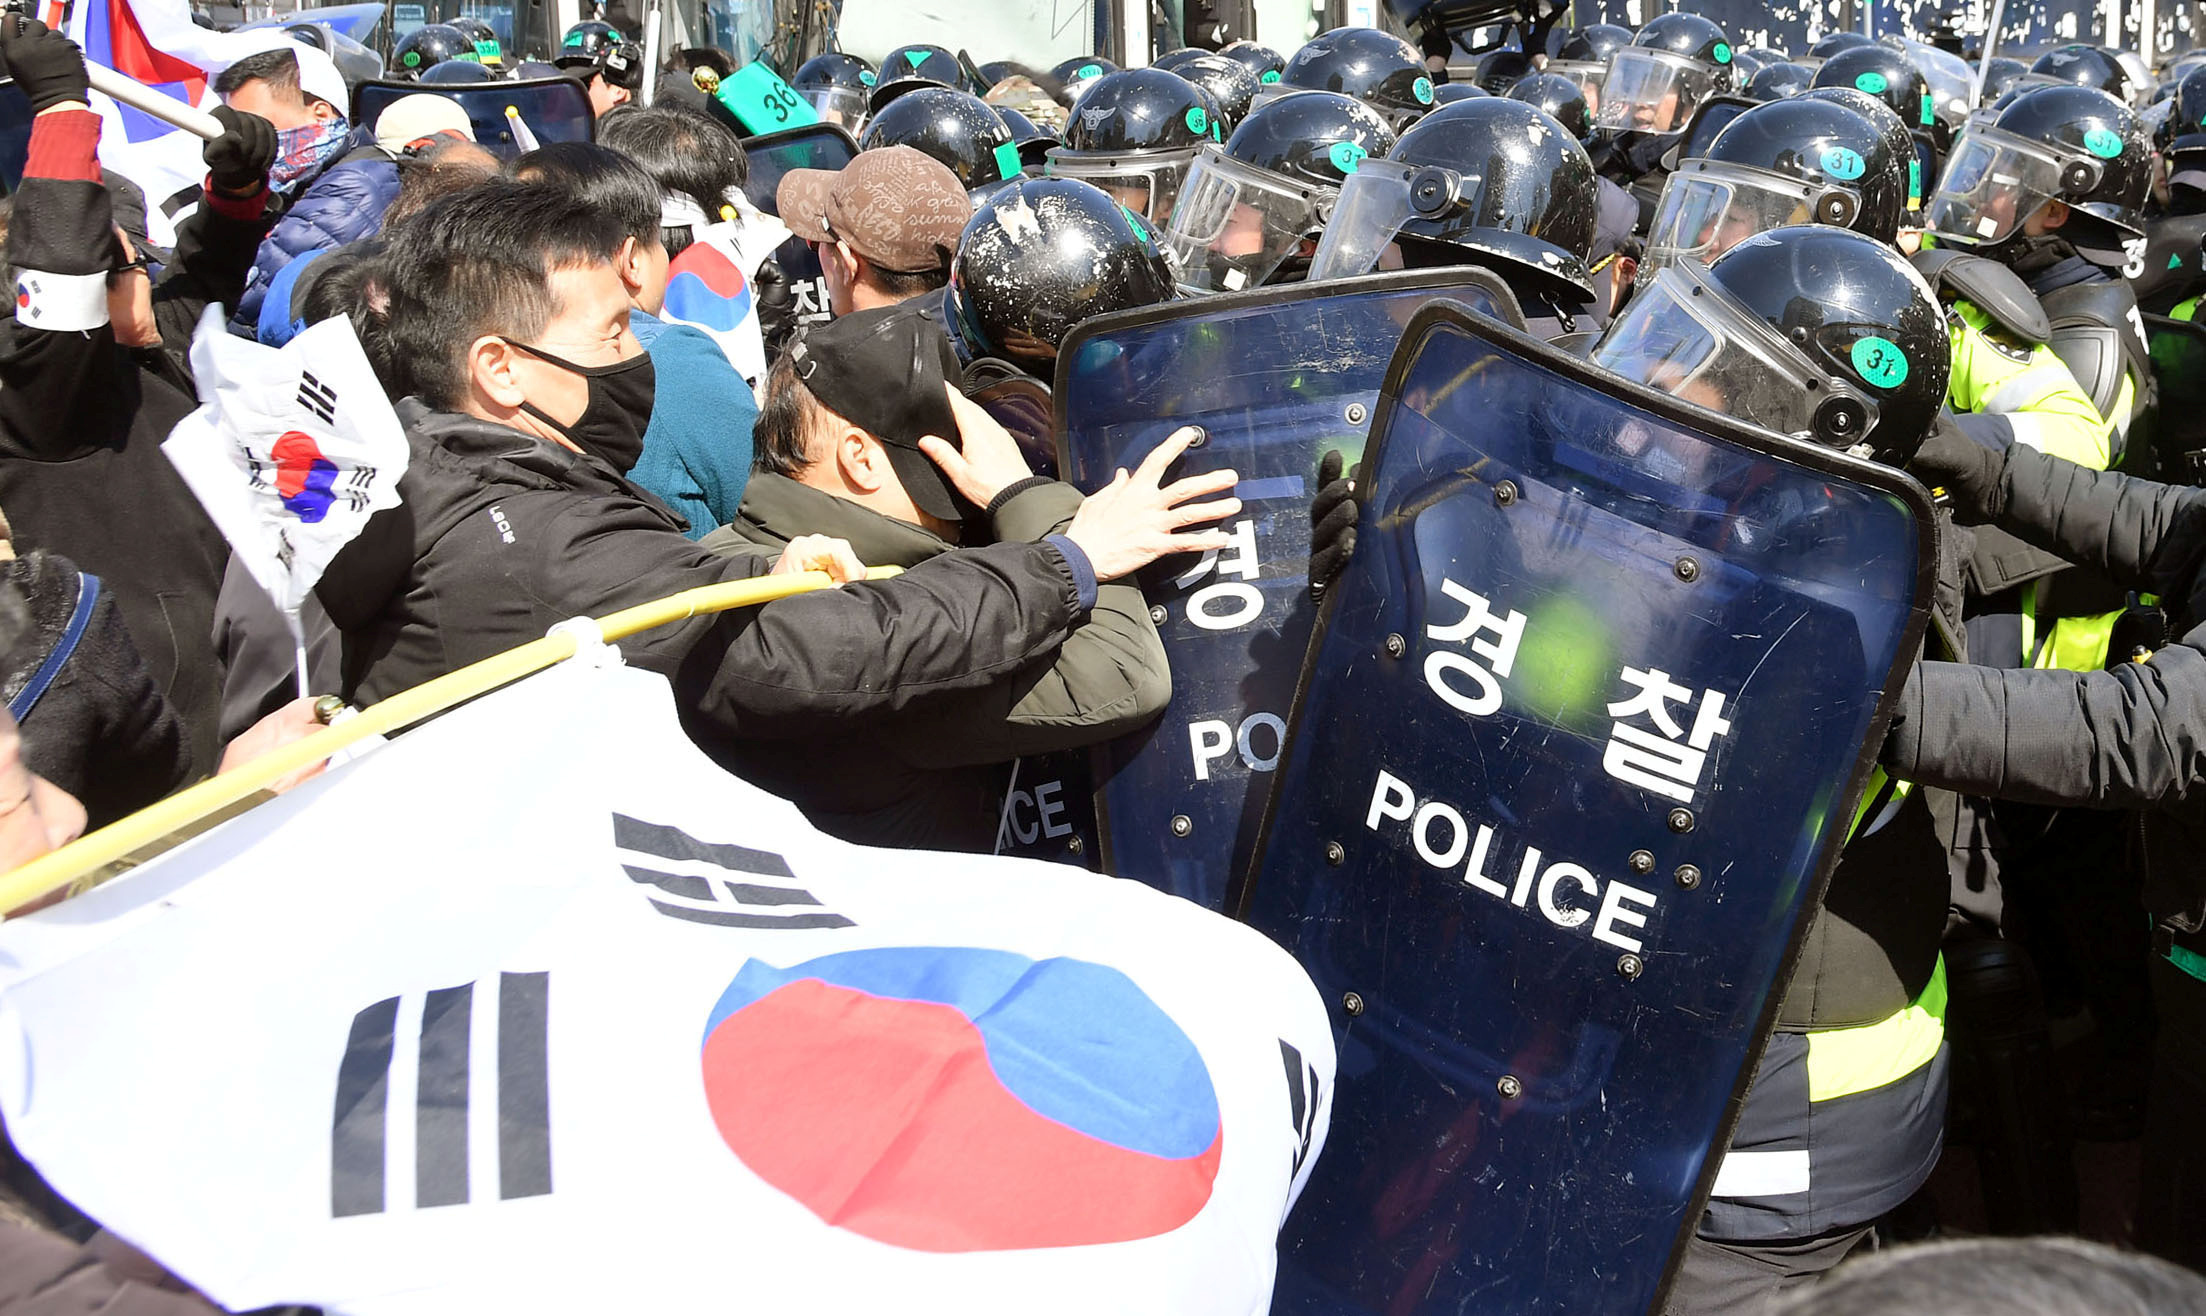 Protesters supporting South Korean President Park Geun-hye clash with riot policemen near the Constitutional Court in Seoul